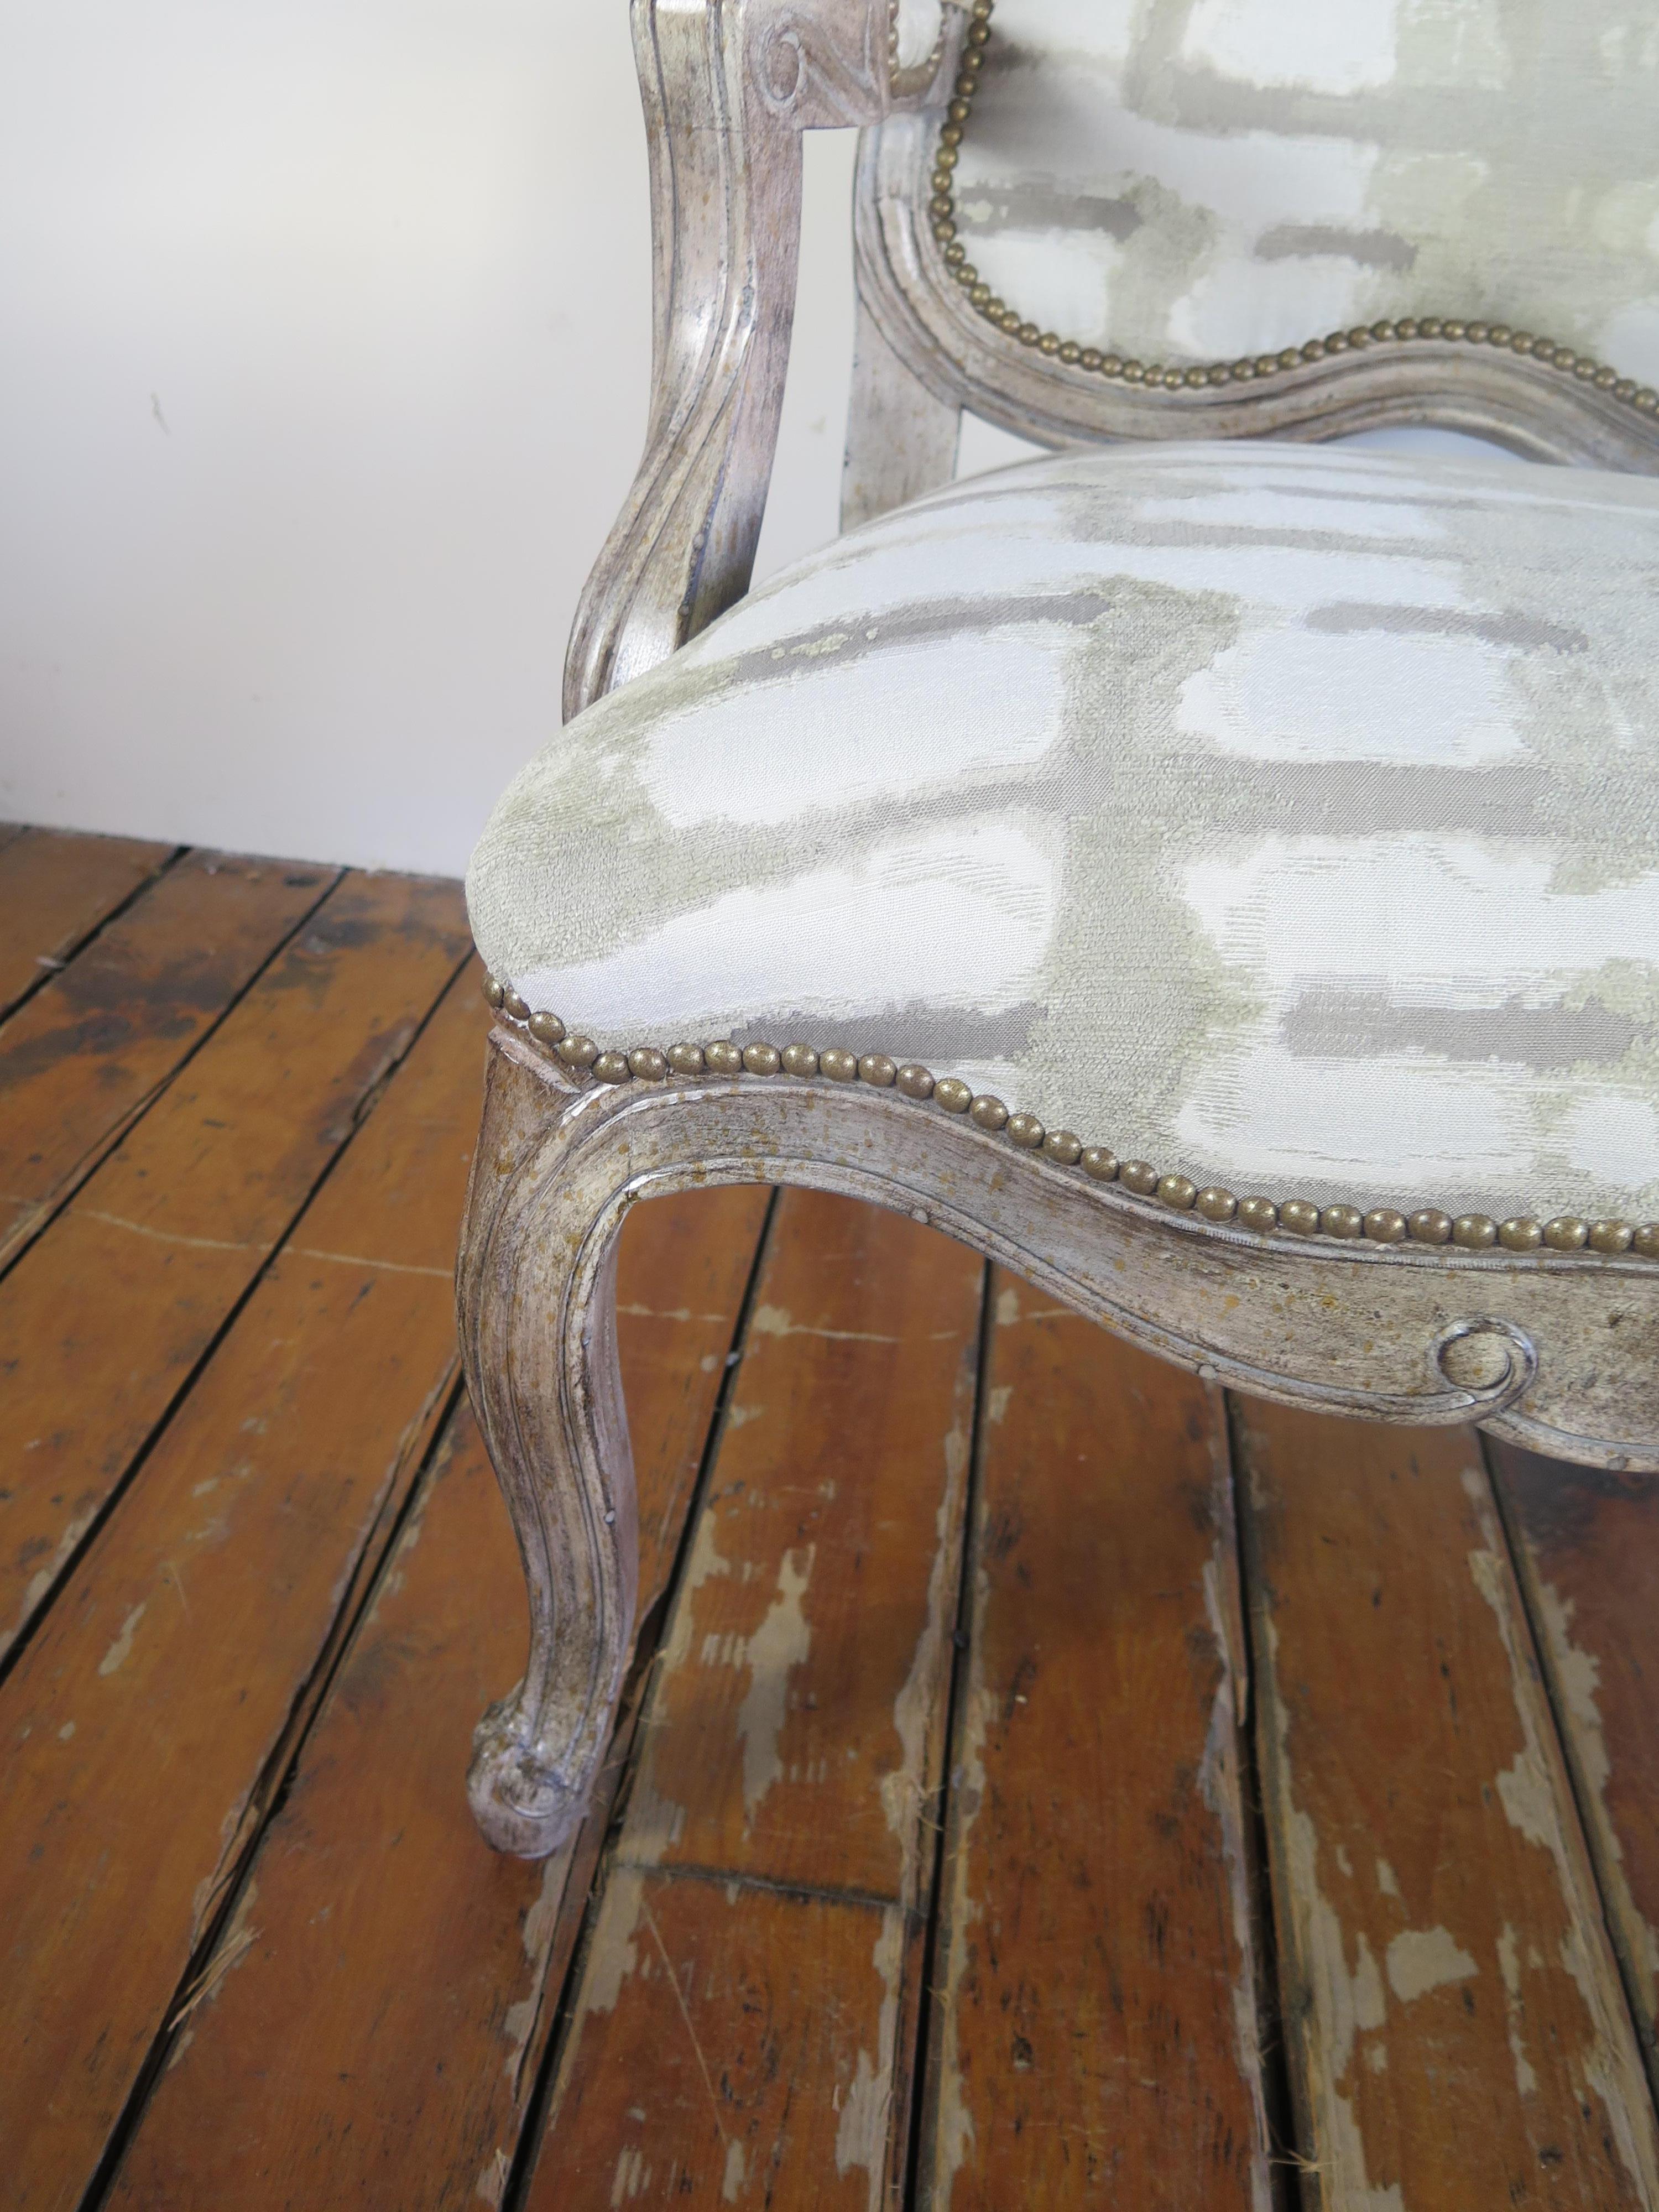 Paul Robert wooden chair with brush stroked pattern, nailhead trim and Finnish linen.